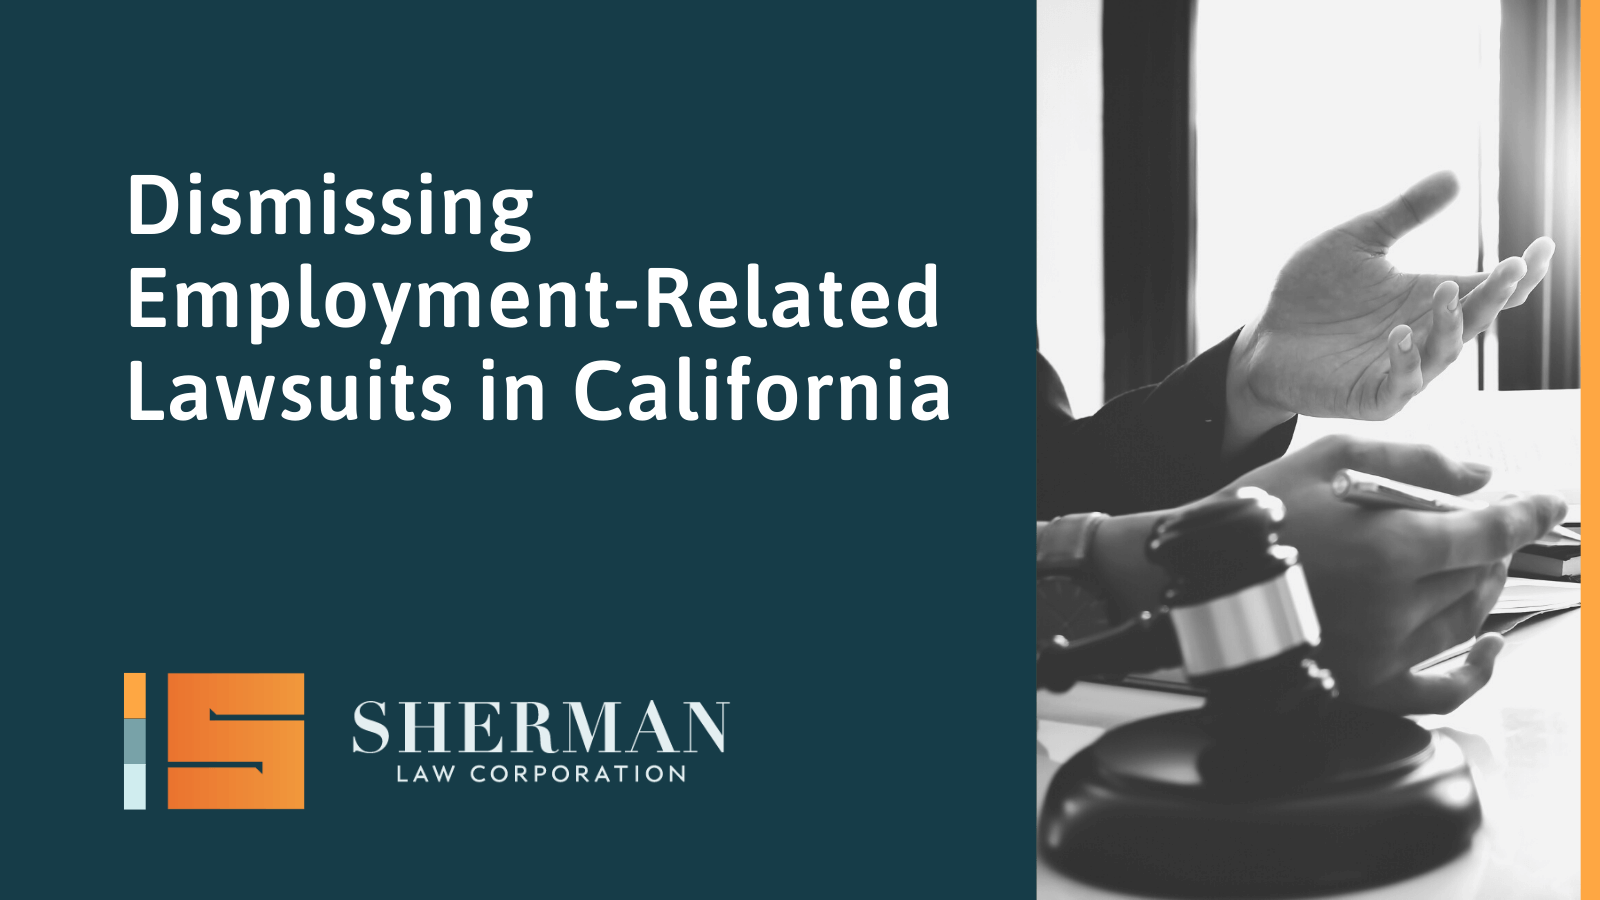 Dismissing Employment-Related Lawsuits in California - california employment lawyer - sherman law corporation